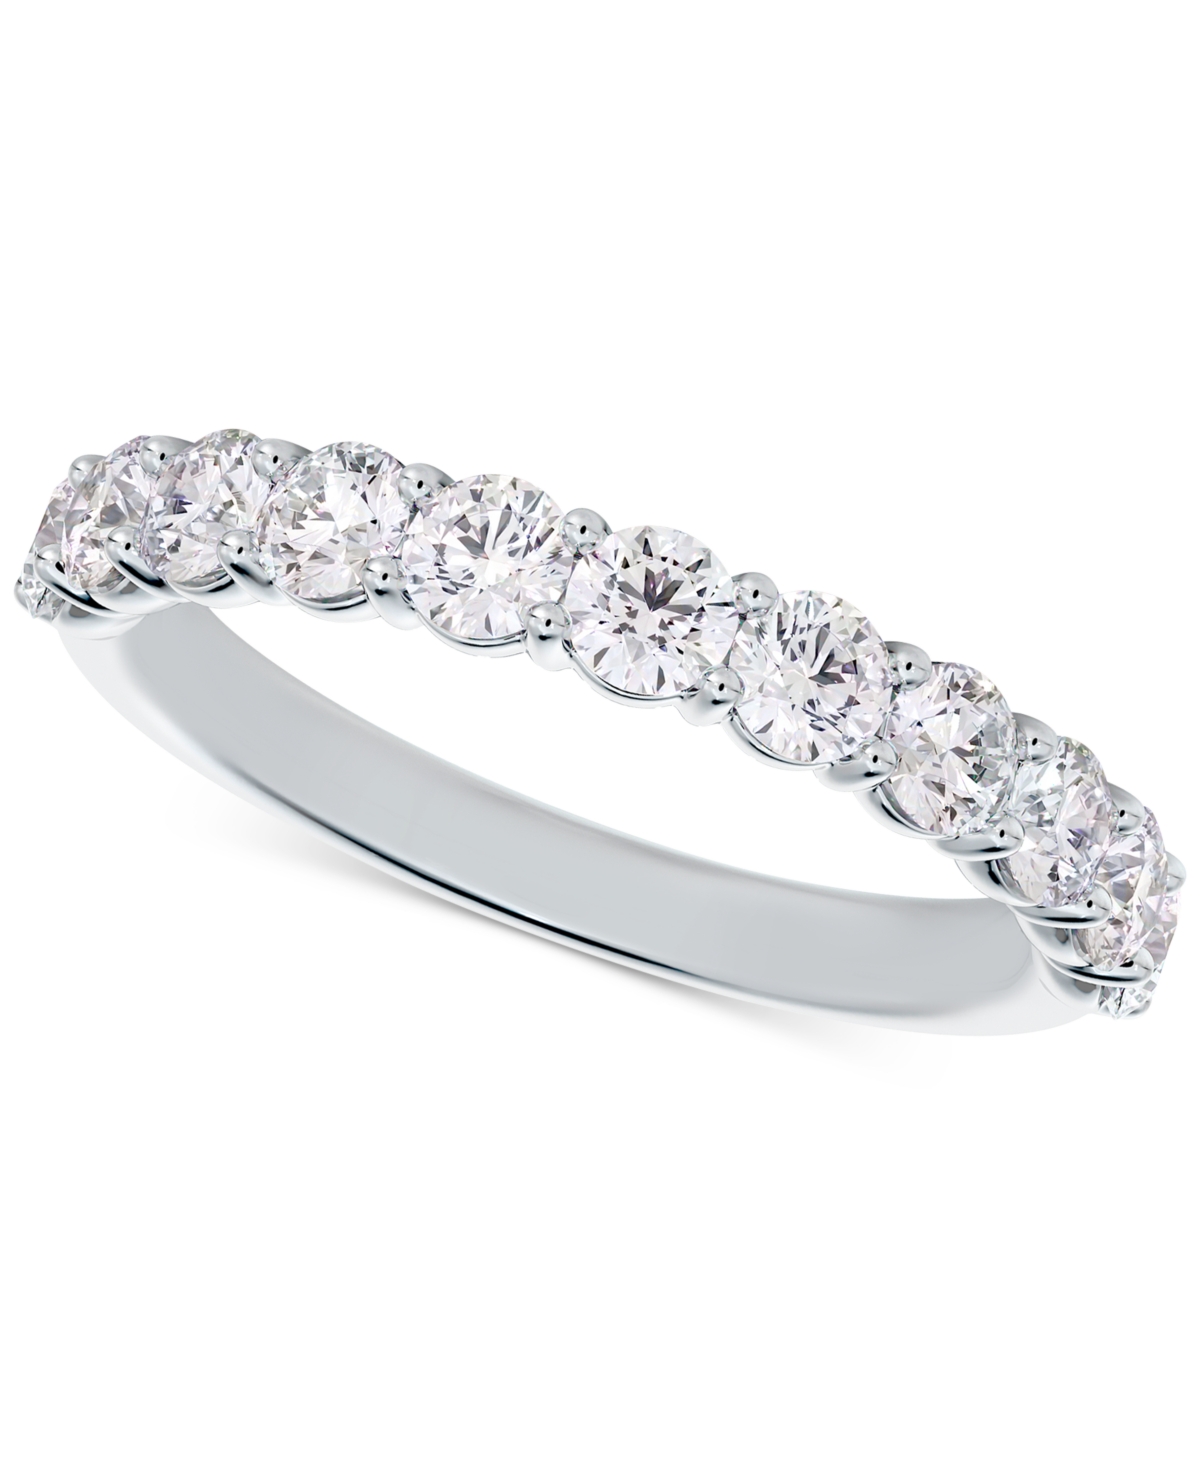 Portfolio by De Beers Forevermark Diamond Eleven Stone Band (1 ct. t.w.) in 14k White Gold - White Gold